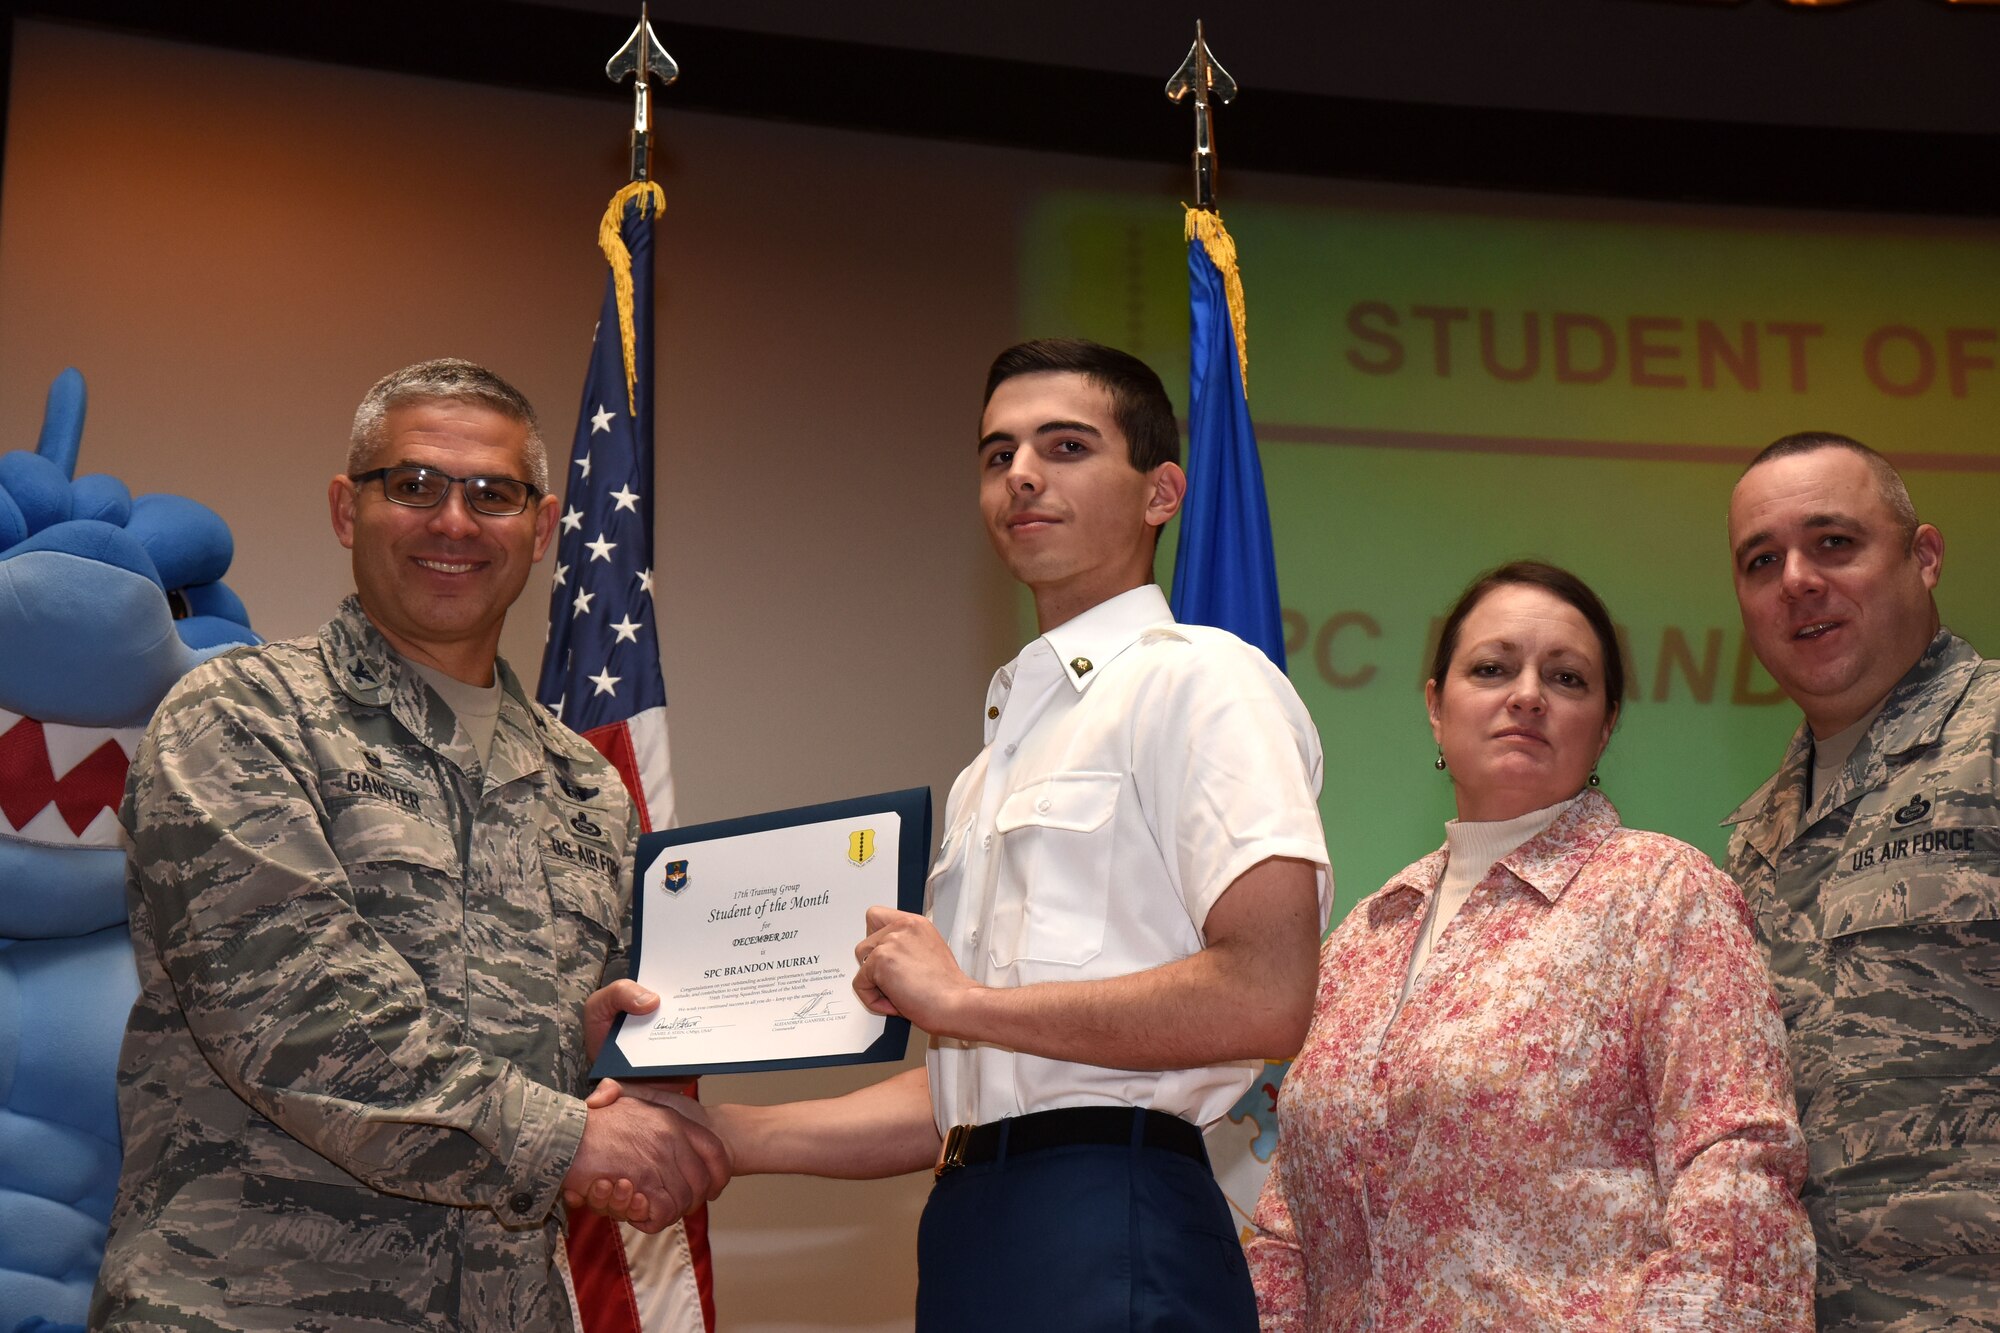 U.S. Air Force Col. Alex Ganster, 17th Training Group commander, presents the 316th Training Squadron Student of the Month award for Dec. 2017 to U.S. Army Spc. Brandon Murray, 316th TRS trainee, in the base theater on Goodfellow Air Force Base, Texas, Jan. 5, 2018. The 316th Training Squadron’s mission is to conduct U.S. Air Force, U.S. Army, U.S. Marine Corps, U.S. Navy and U.S. Coast Guard cryptologic, human intelligence and military training. (U.S. Air Force photo by Airman 1st Class Seraiah Hines/Released)